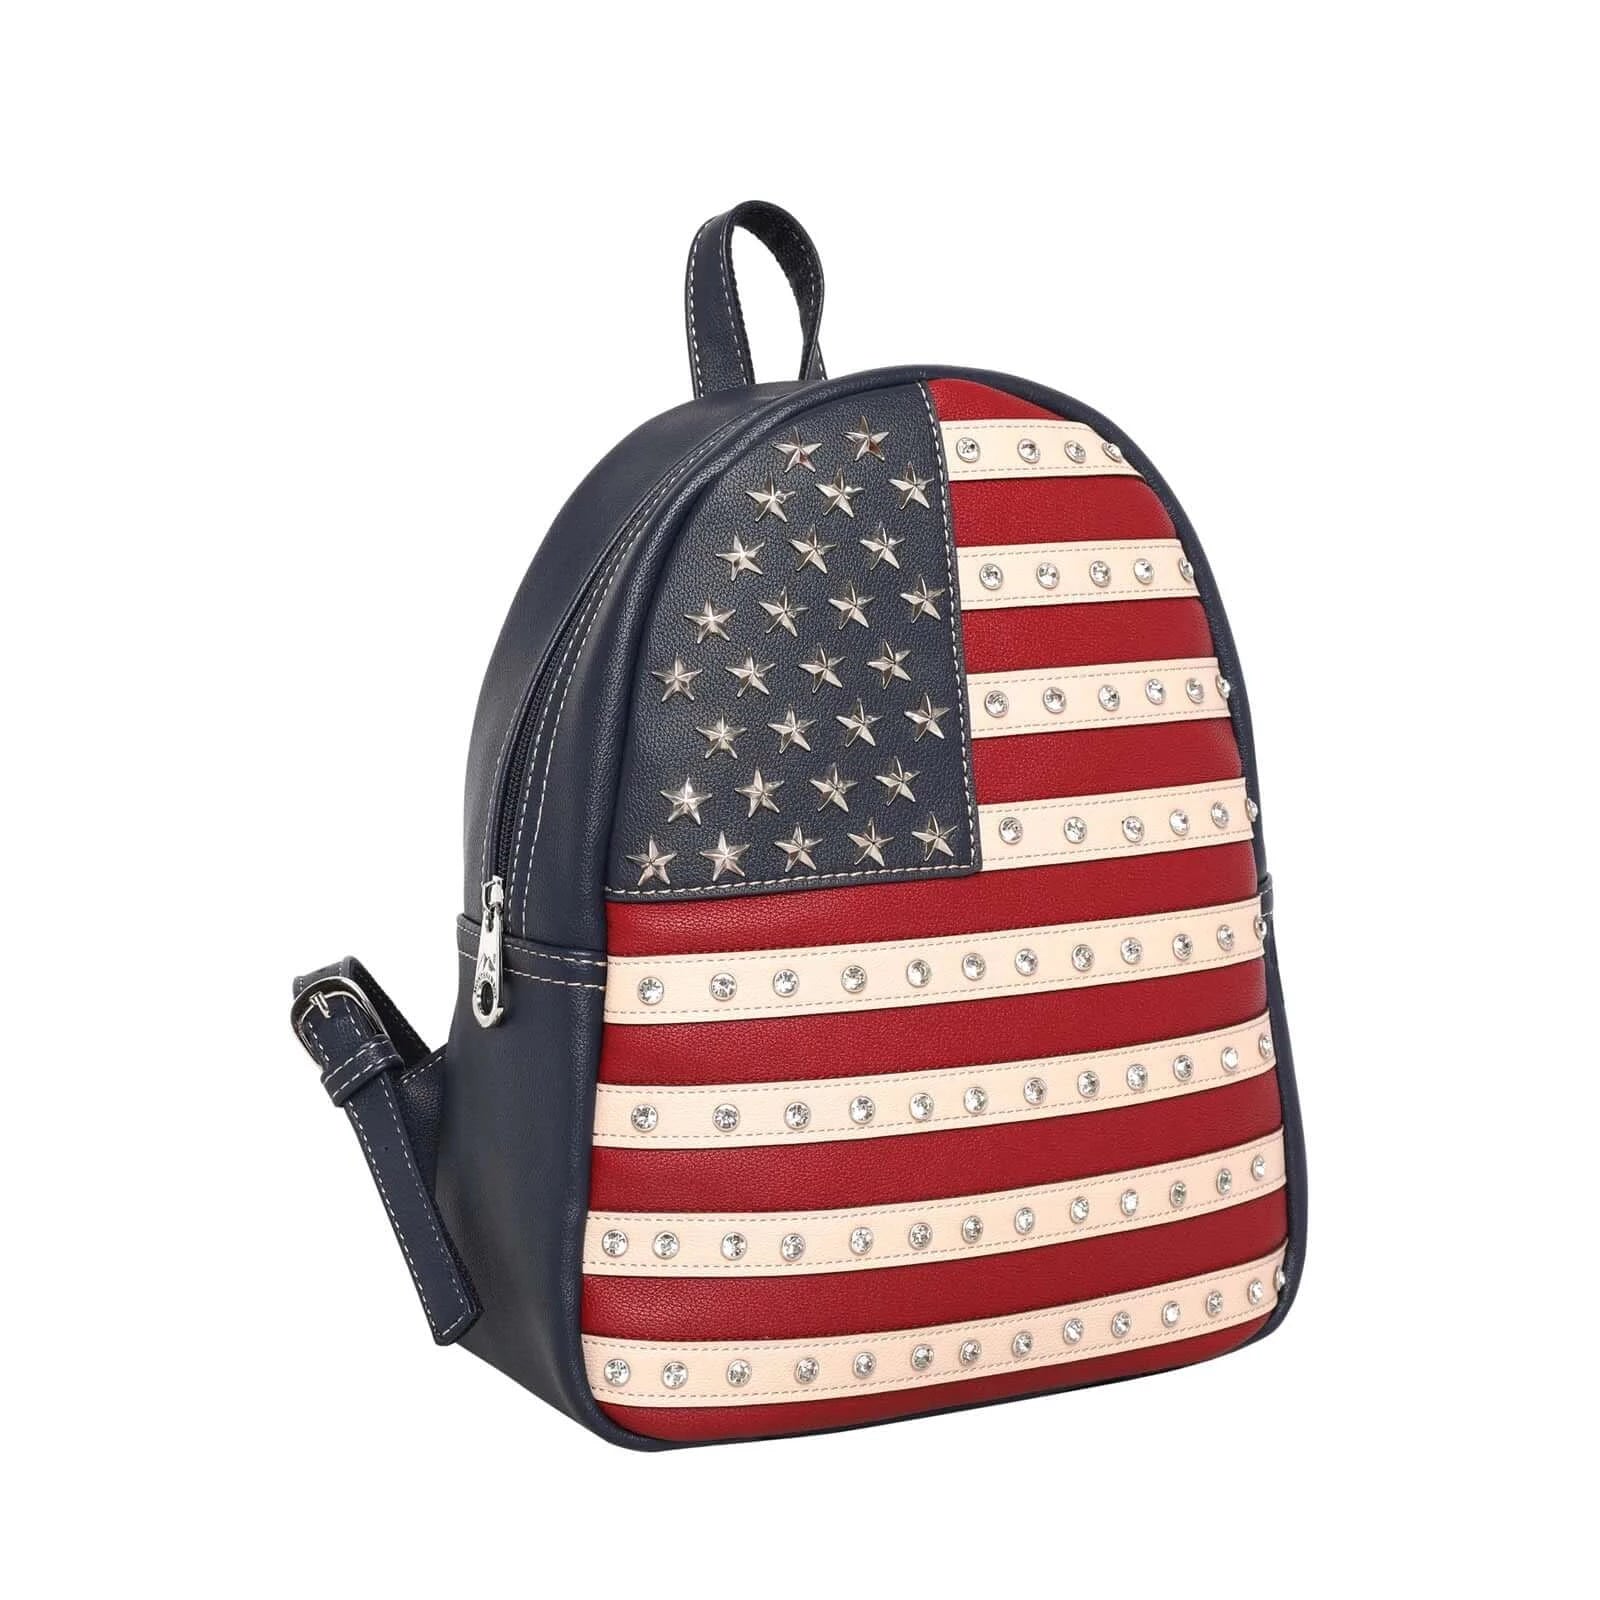 Montana West American Pride Concealed Carry Backpack US Flag Bag Red-US04G-9110-1600-NY-1-1